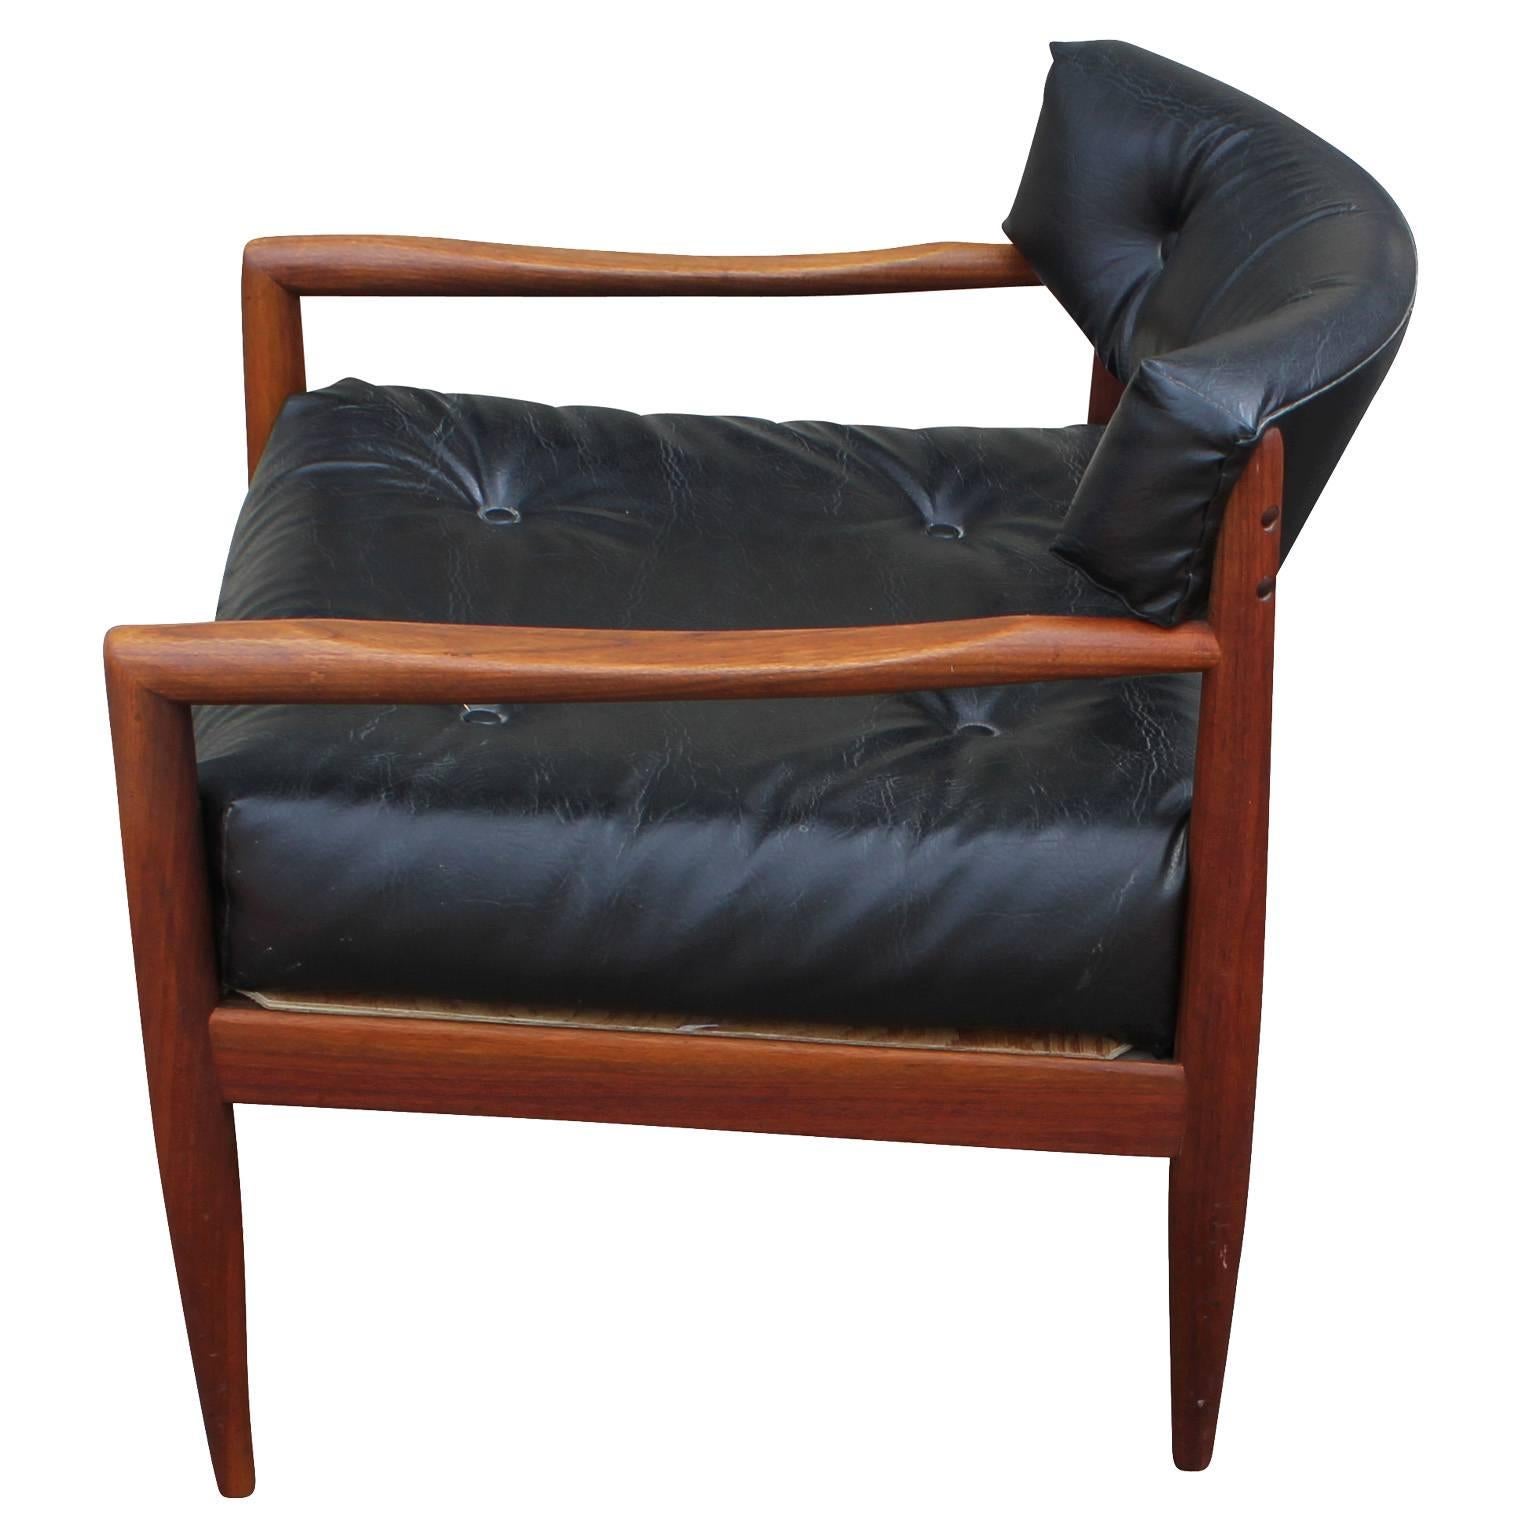 Mid-20th Century Sculptural Pair of Adrian Pearsall Walnut Lounge Chairs